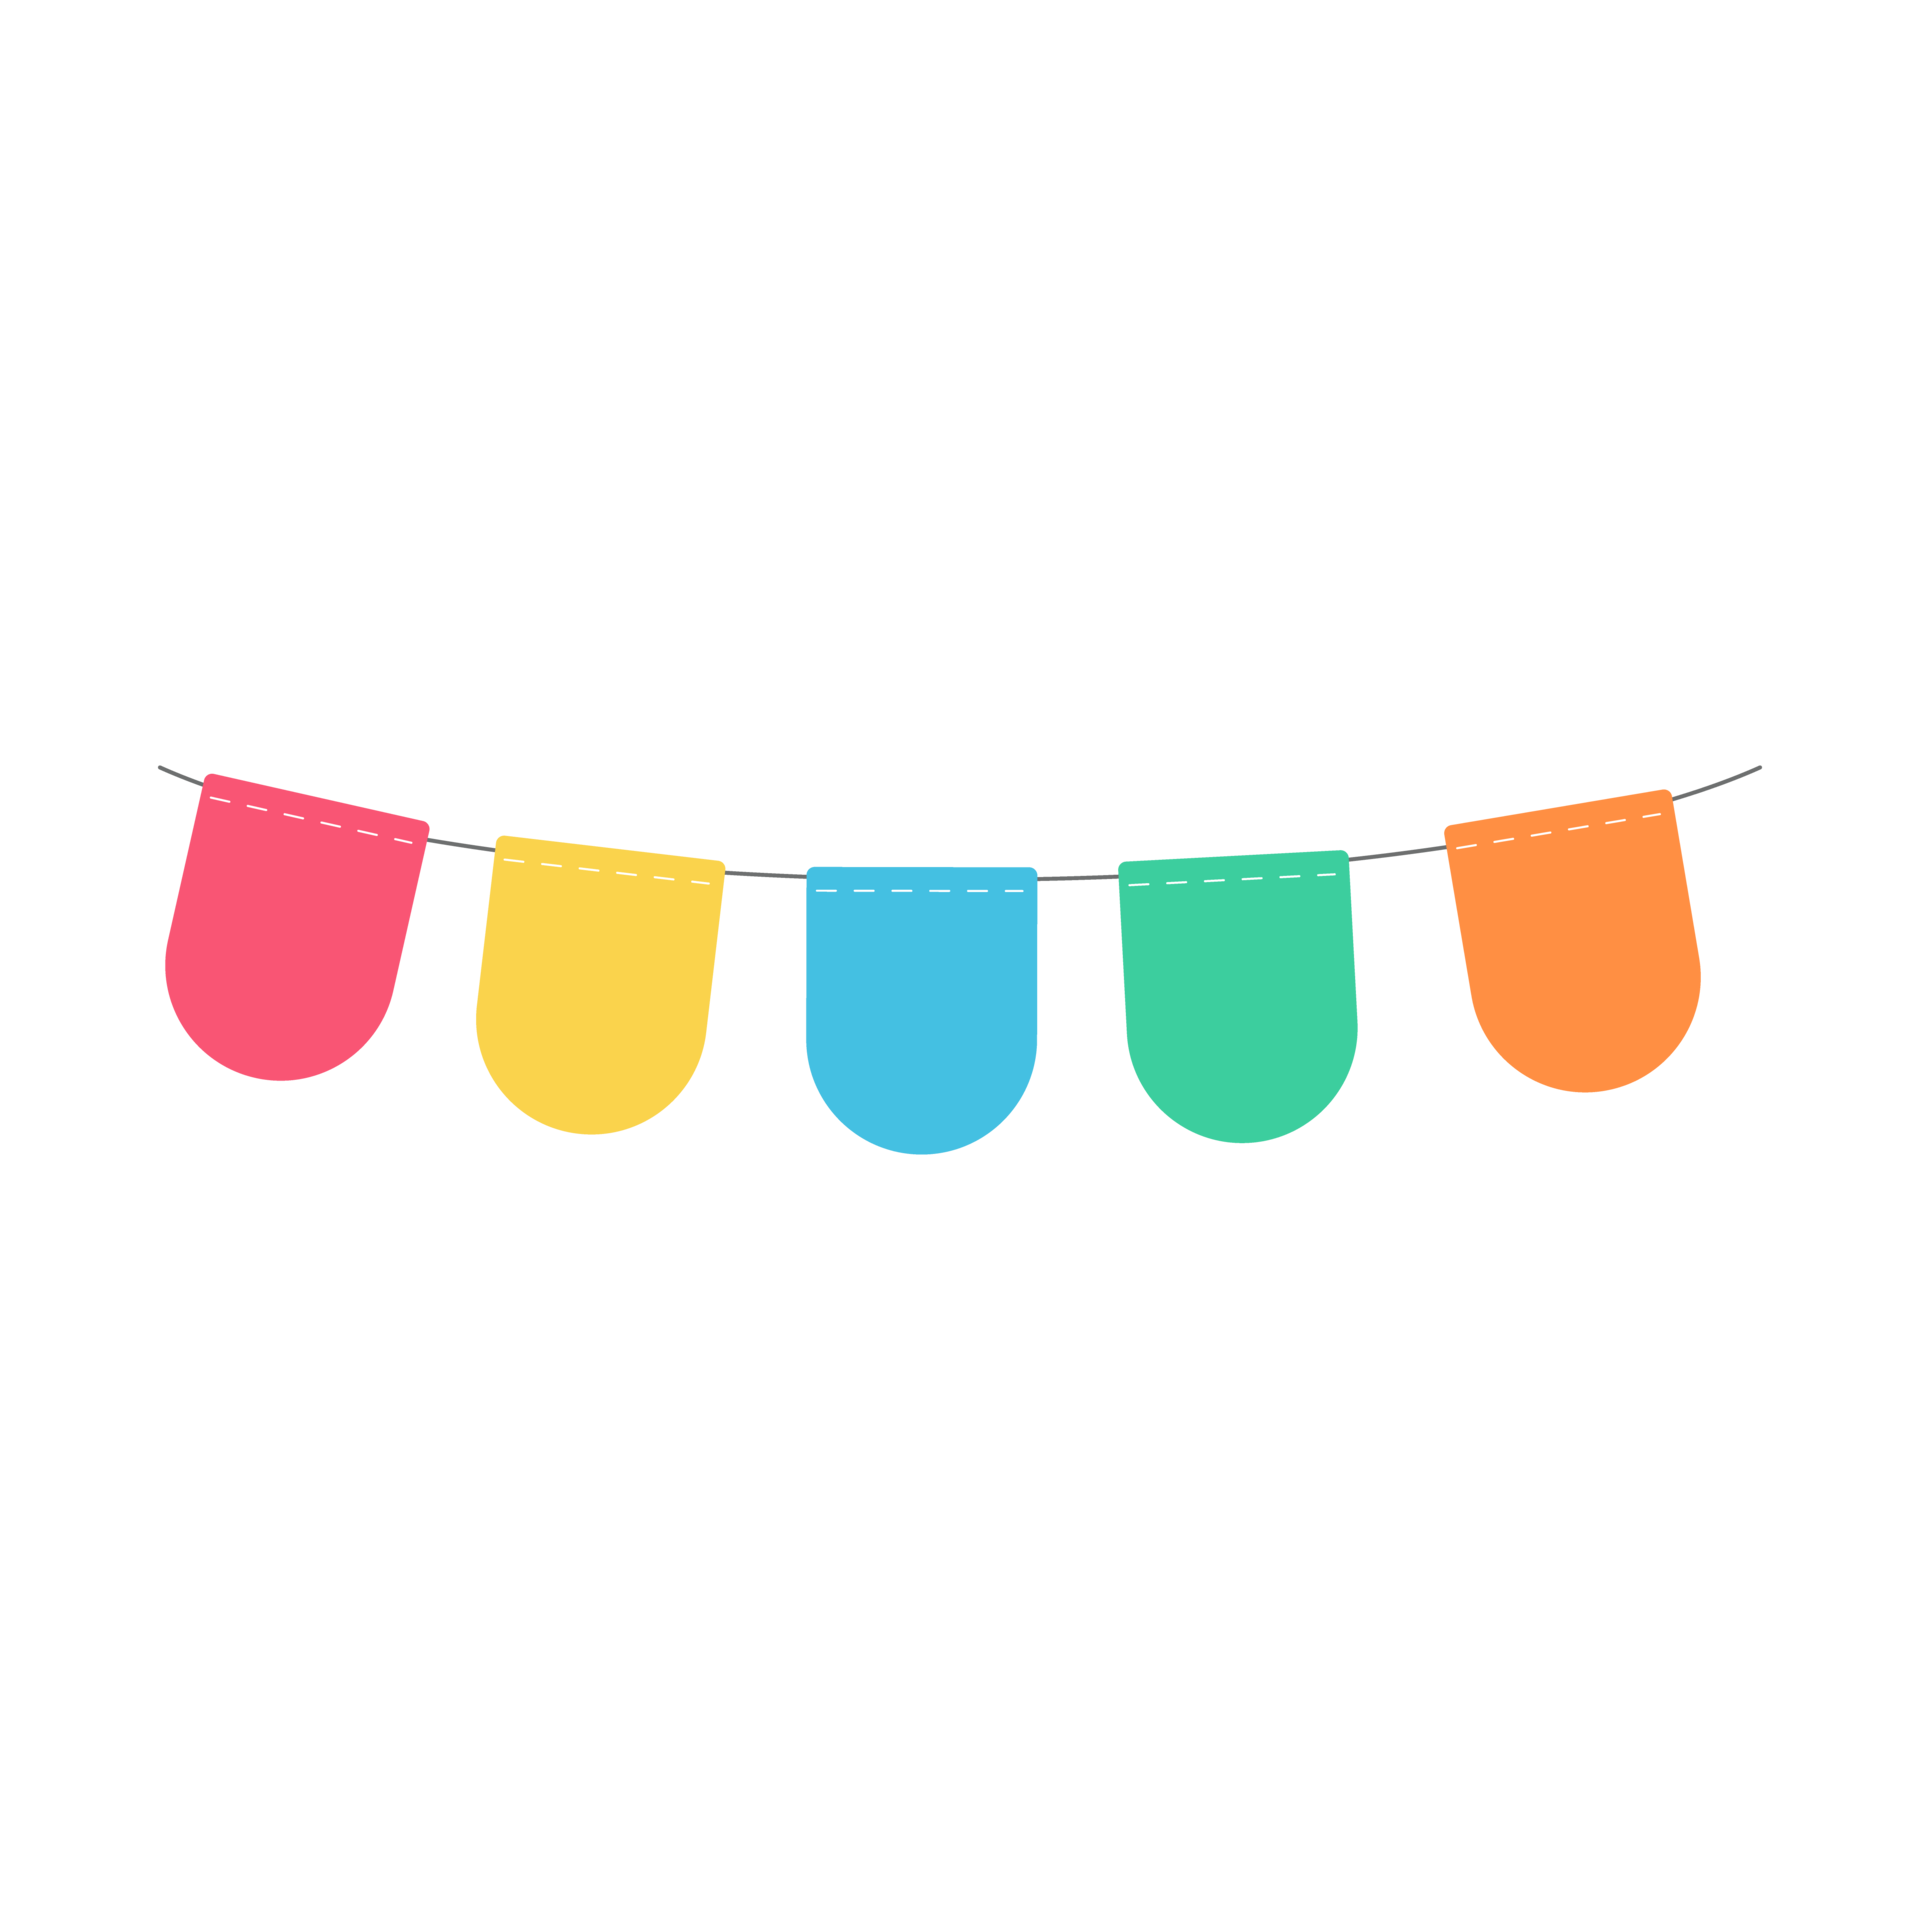 free-party-bunting-flags-colorful-flags-to-hang-at-celebration-parties